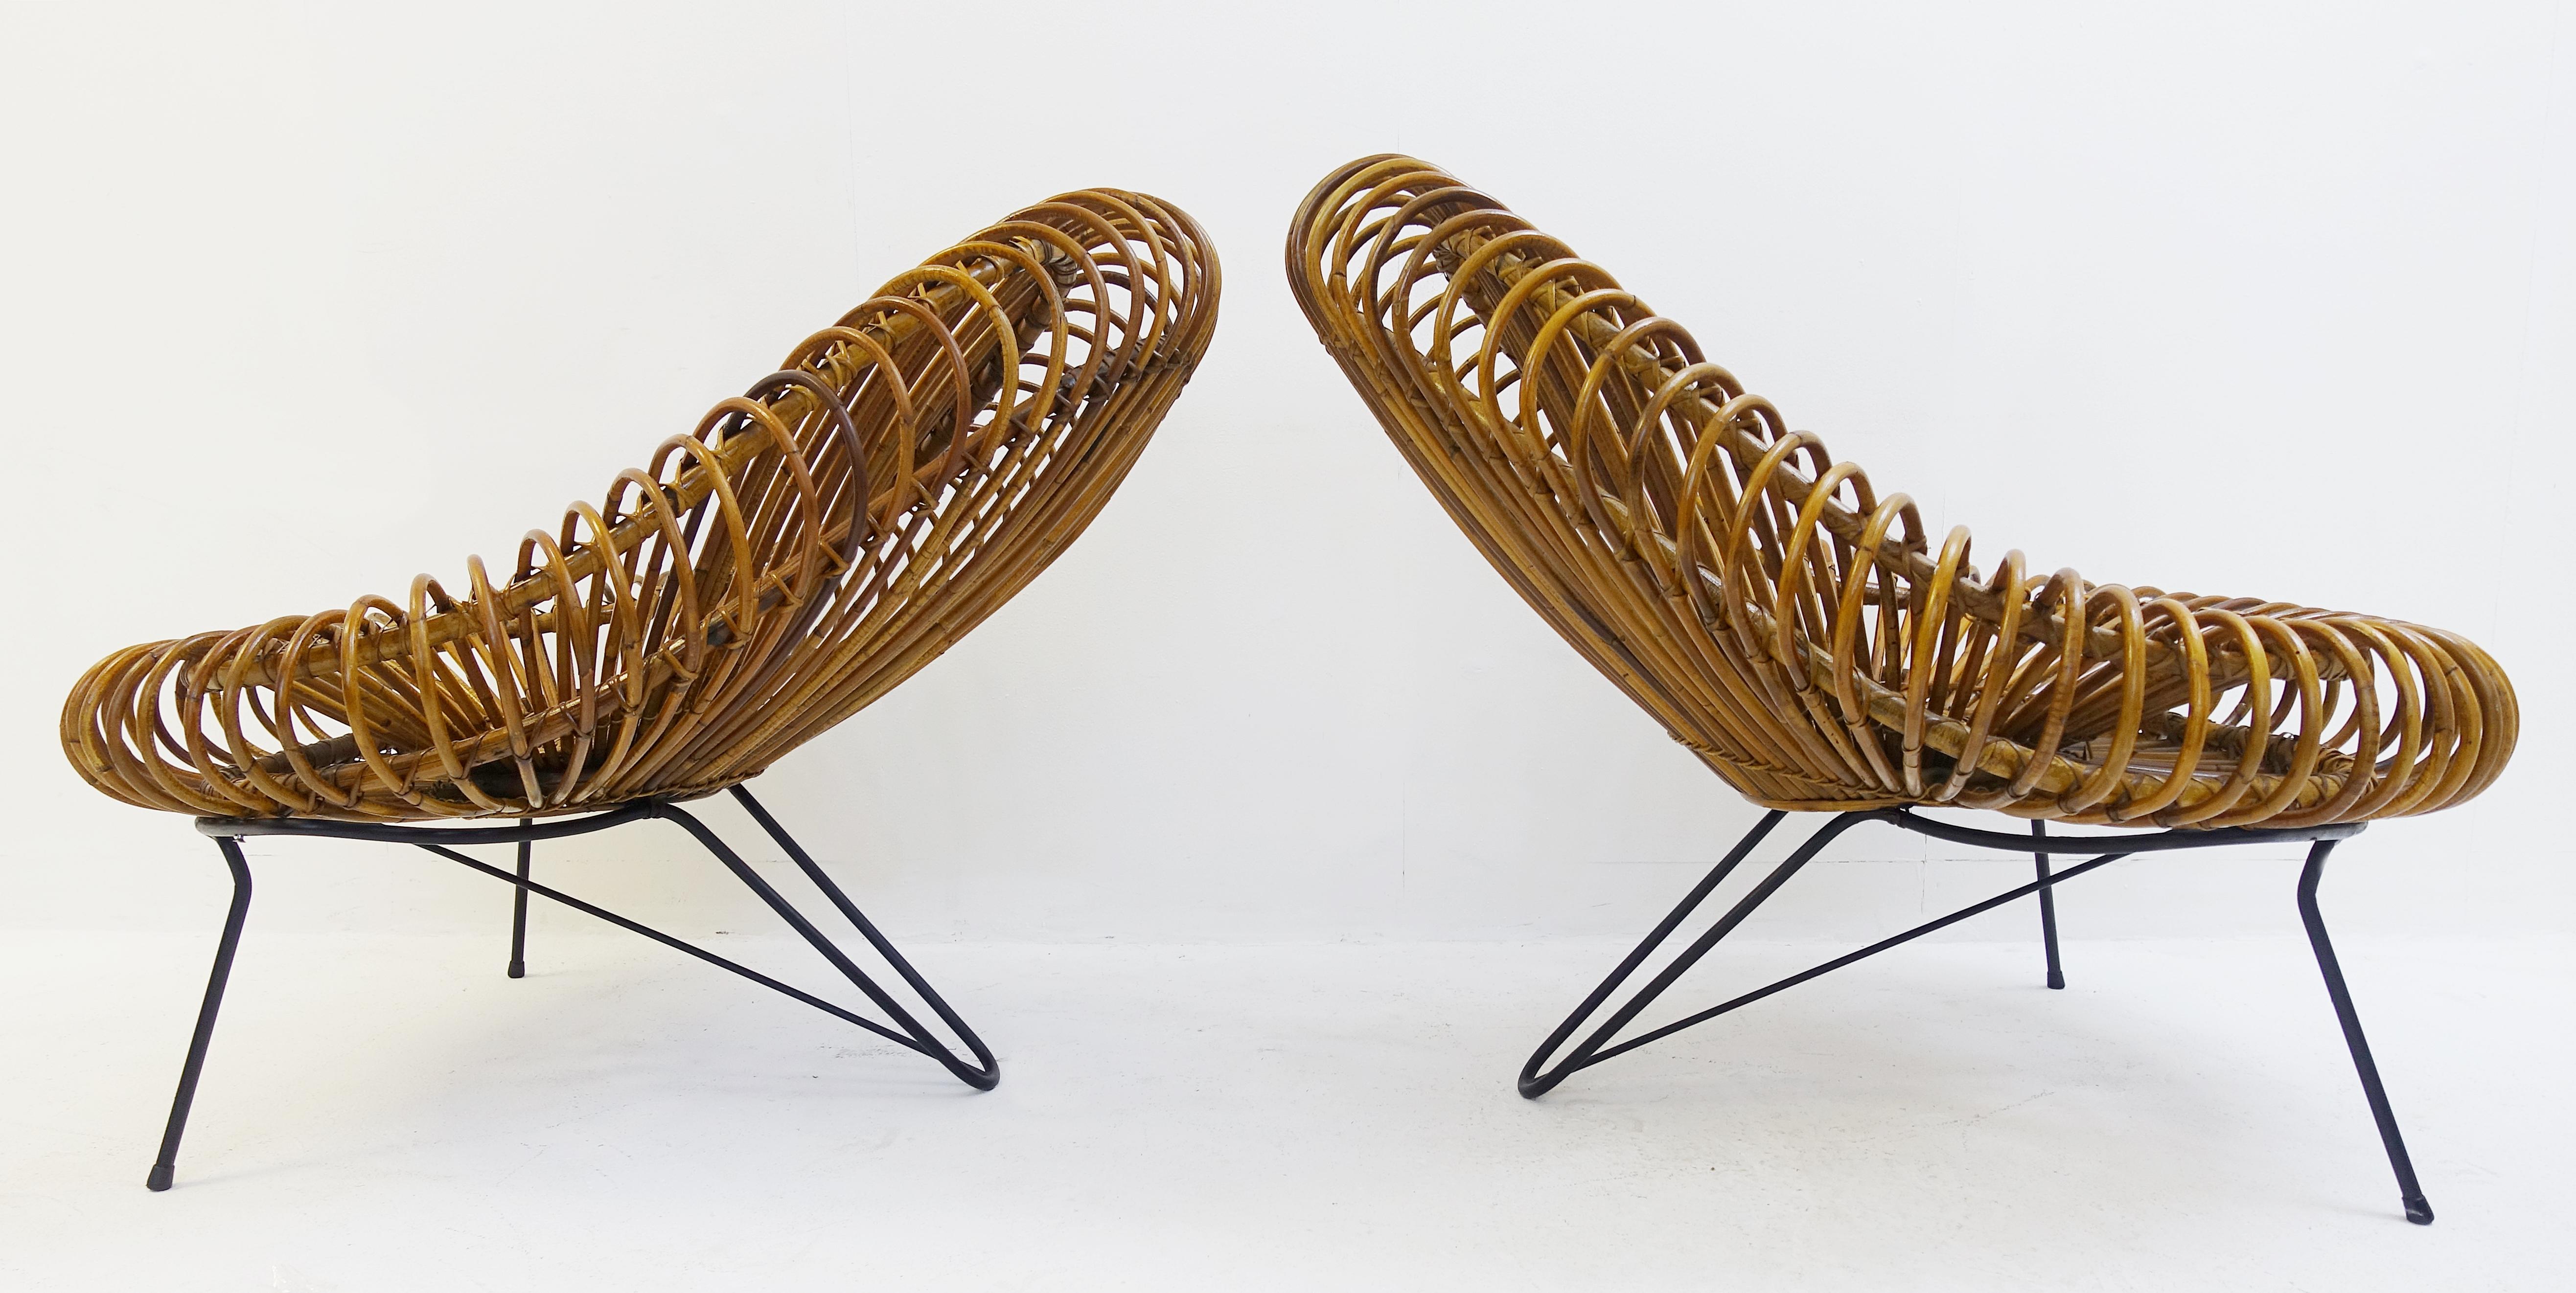 Spectacular lounge chair, basket form in curved rattan and bamboo, on black enameled steel, circa 1960.